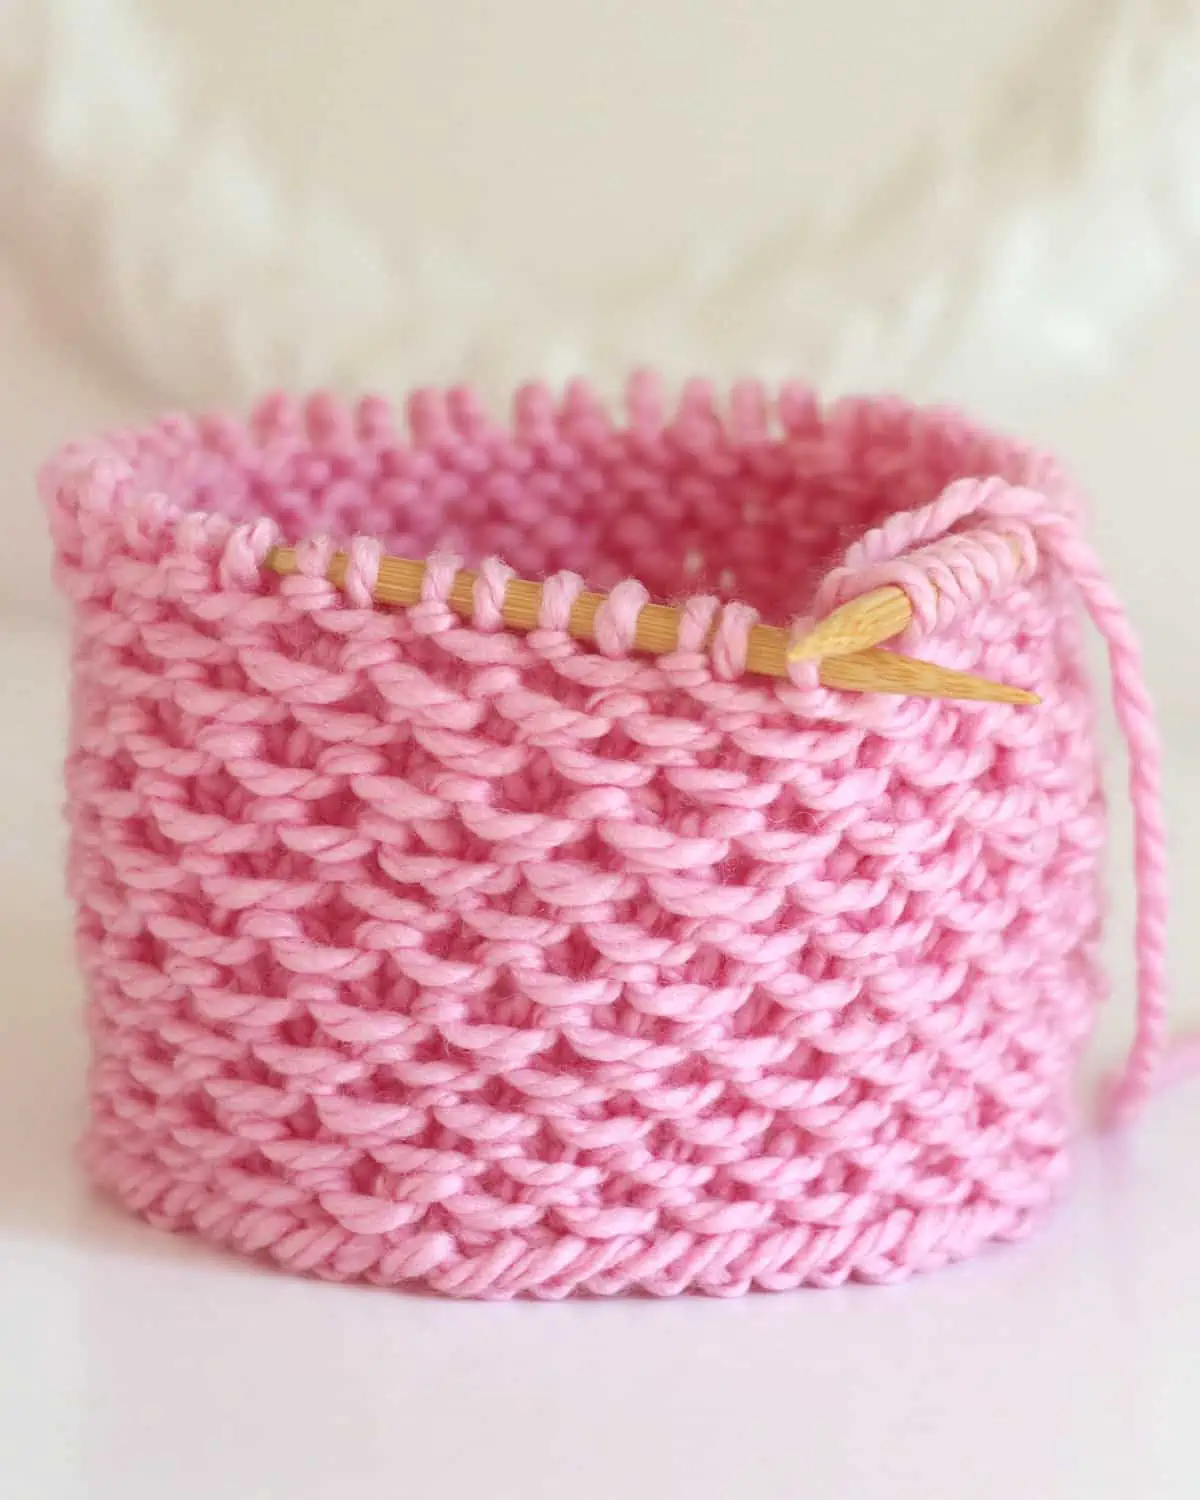 Stamen Stitch knitted in the round on circular needles with pink colored yarn.